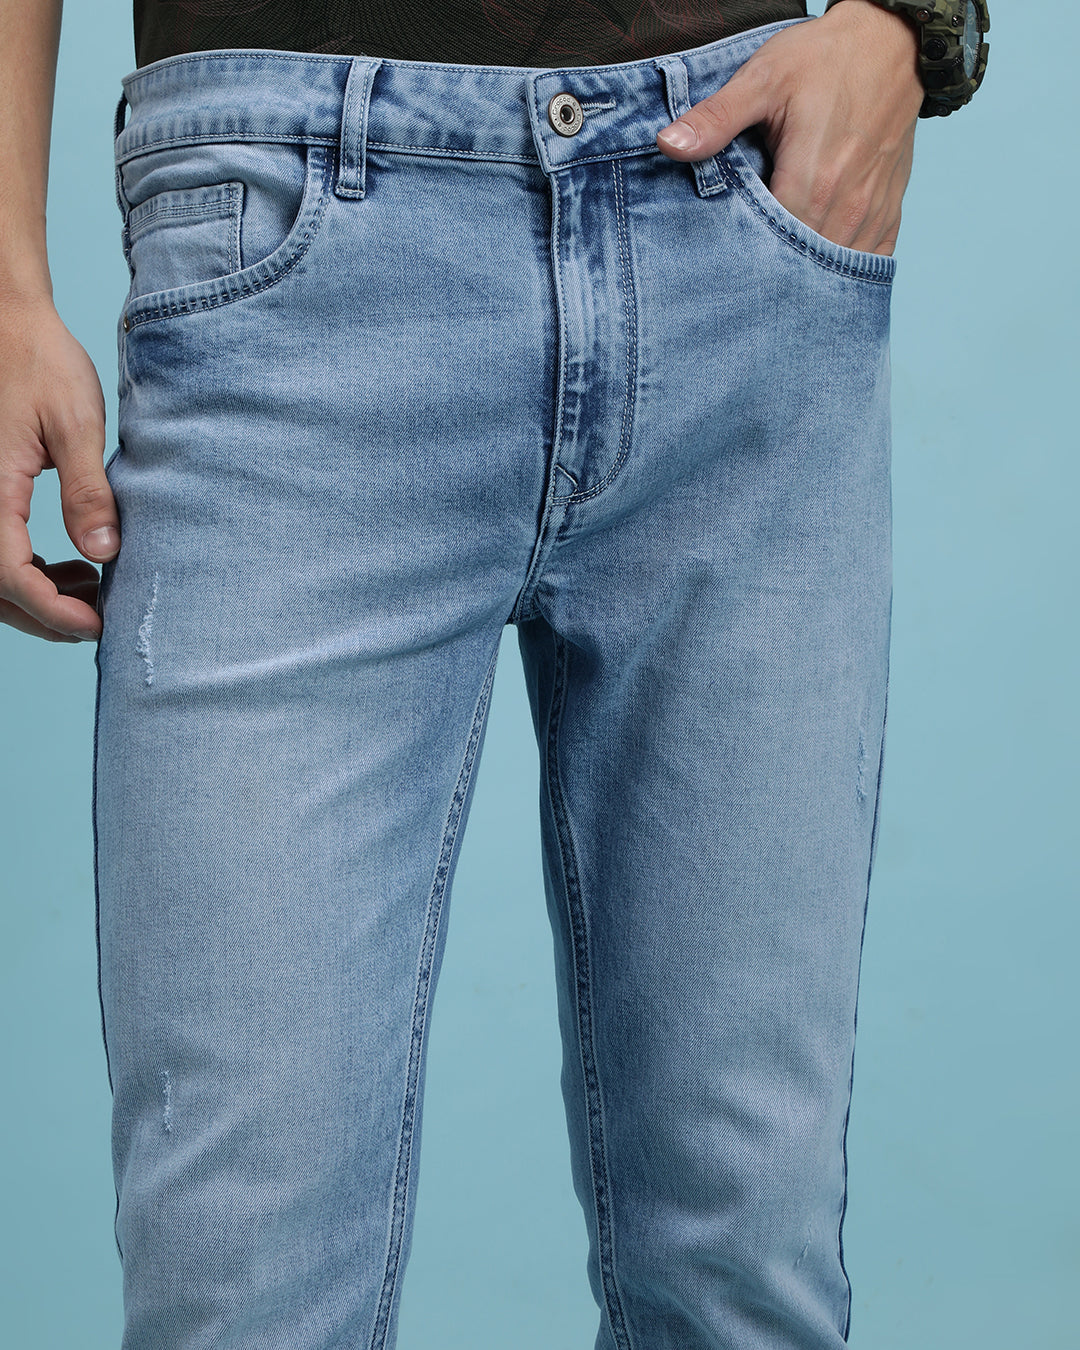 CLOUD WASHED JEANS IN ICE BLUE COLOUR